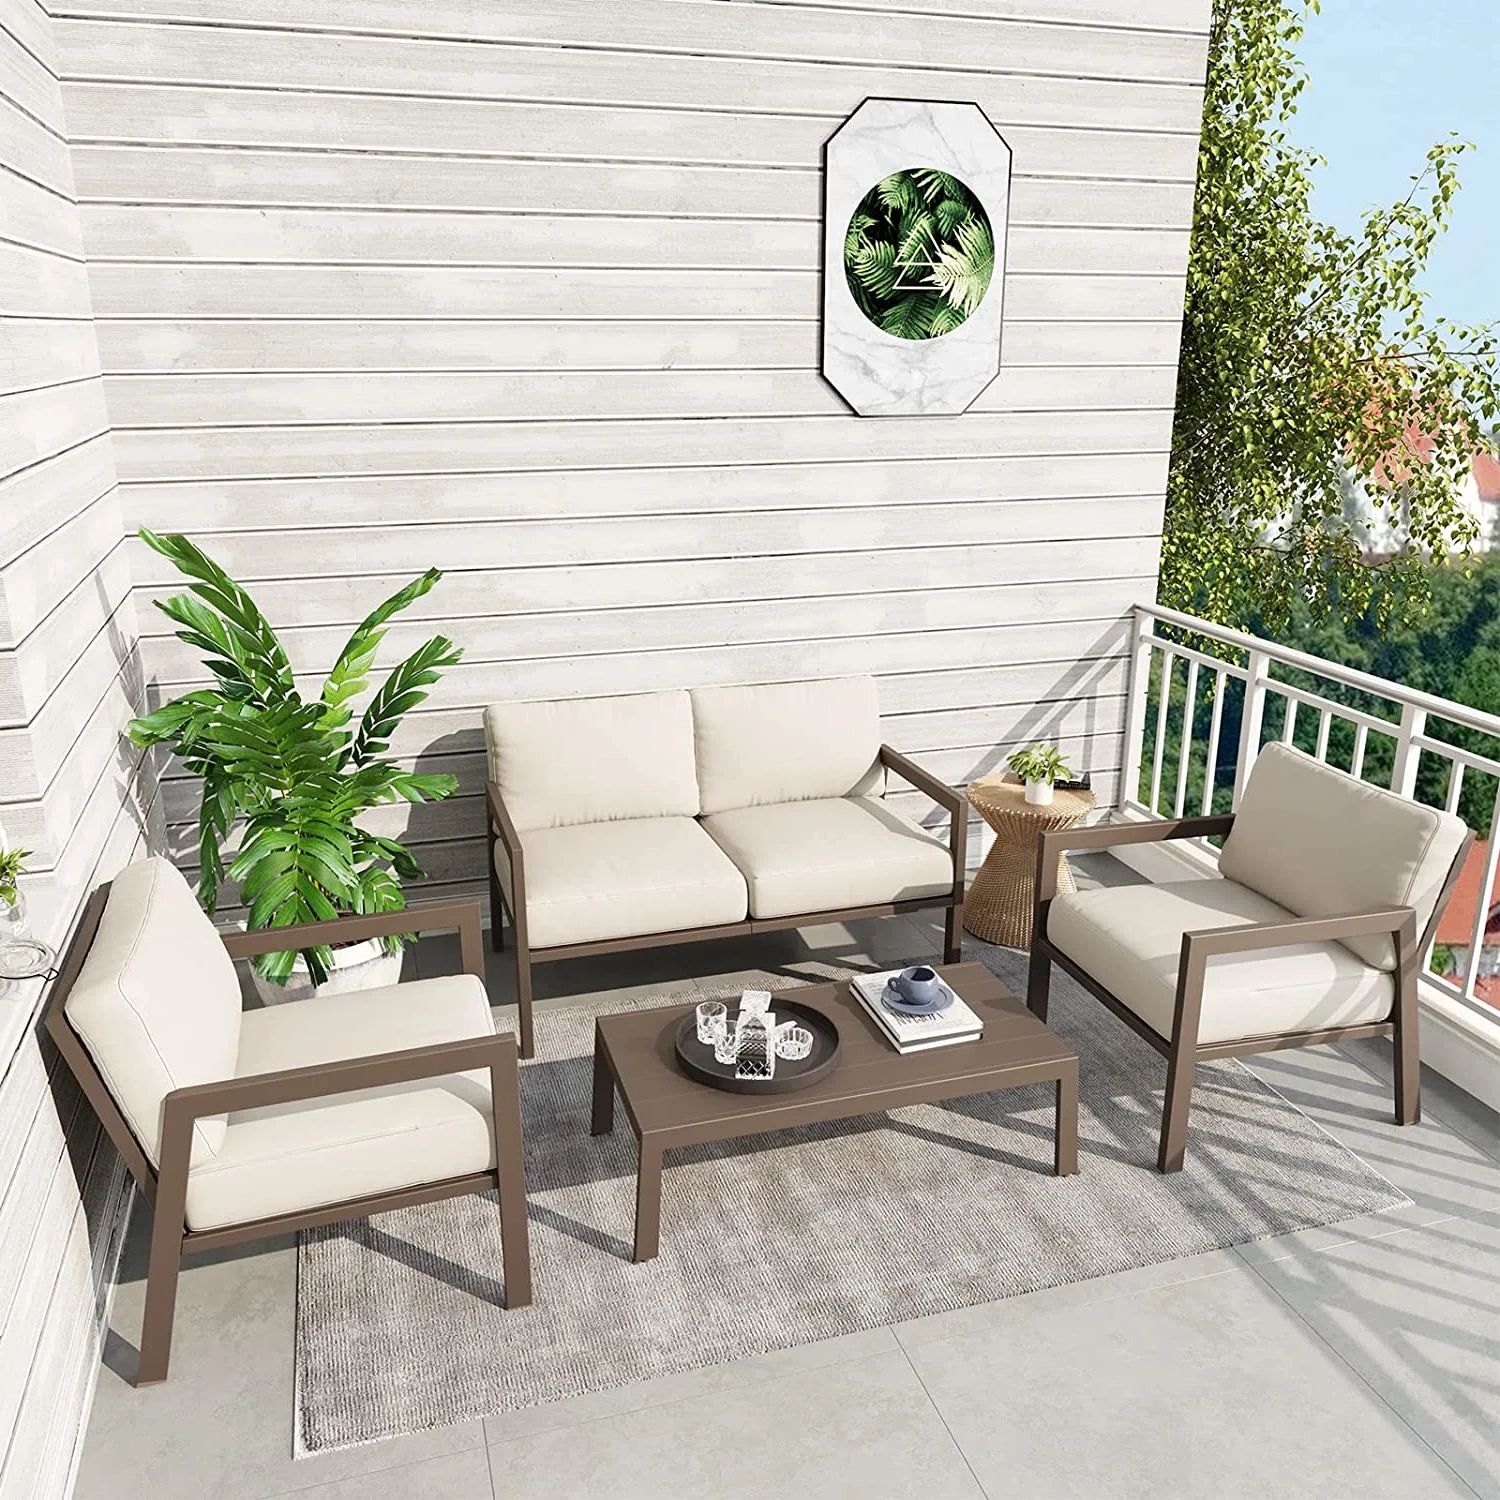 Made In China Pertaining To Most Up To Date Side Table Iron Frame Patio Furniture Set (View 11 of 15)